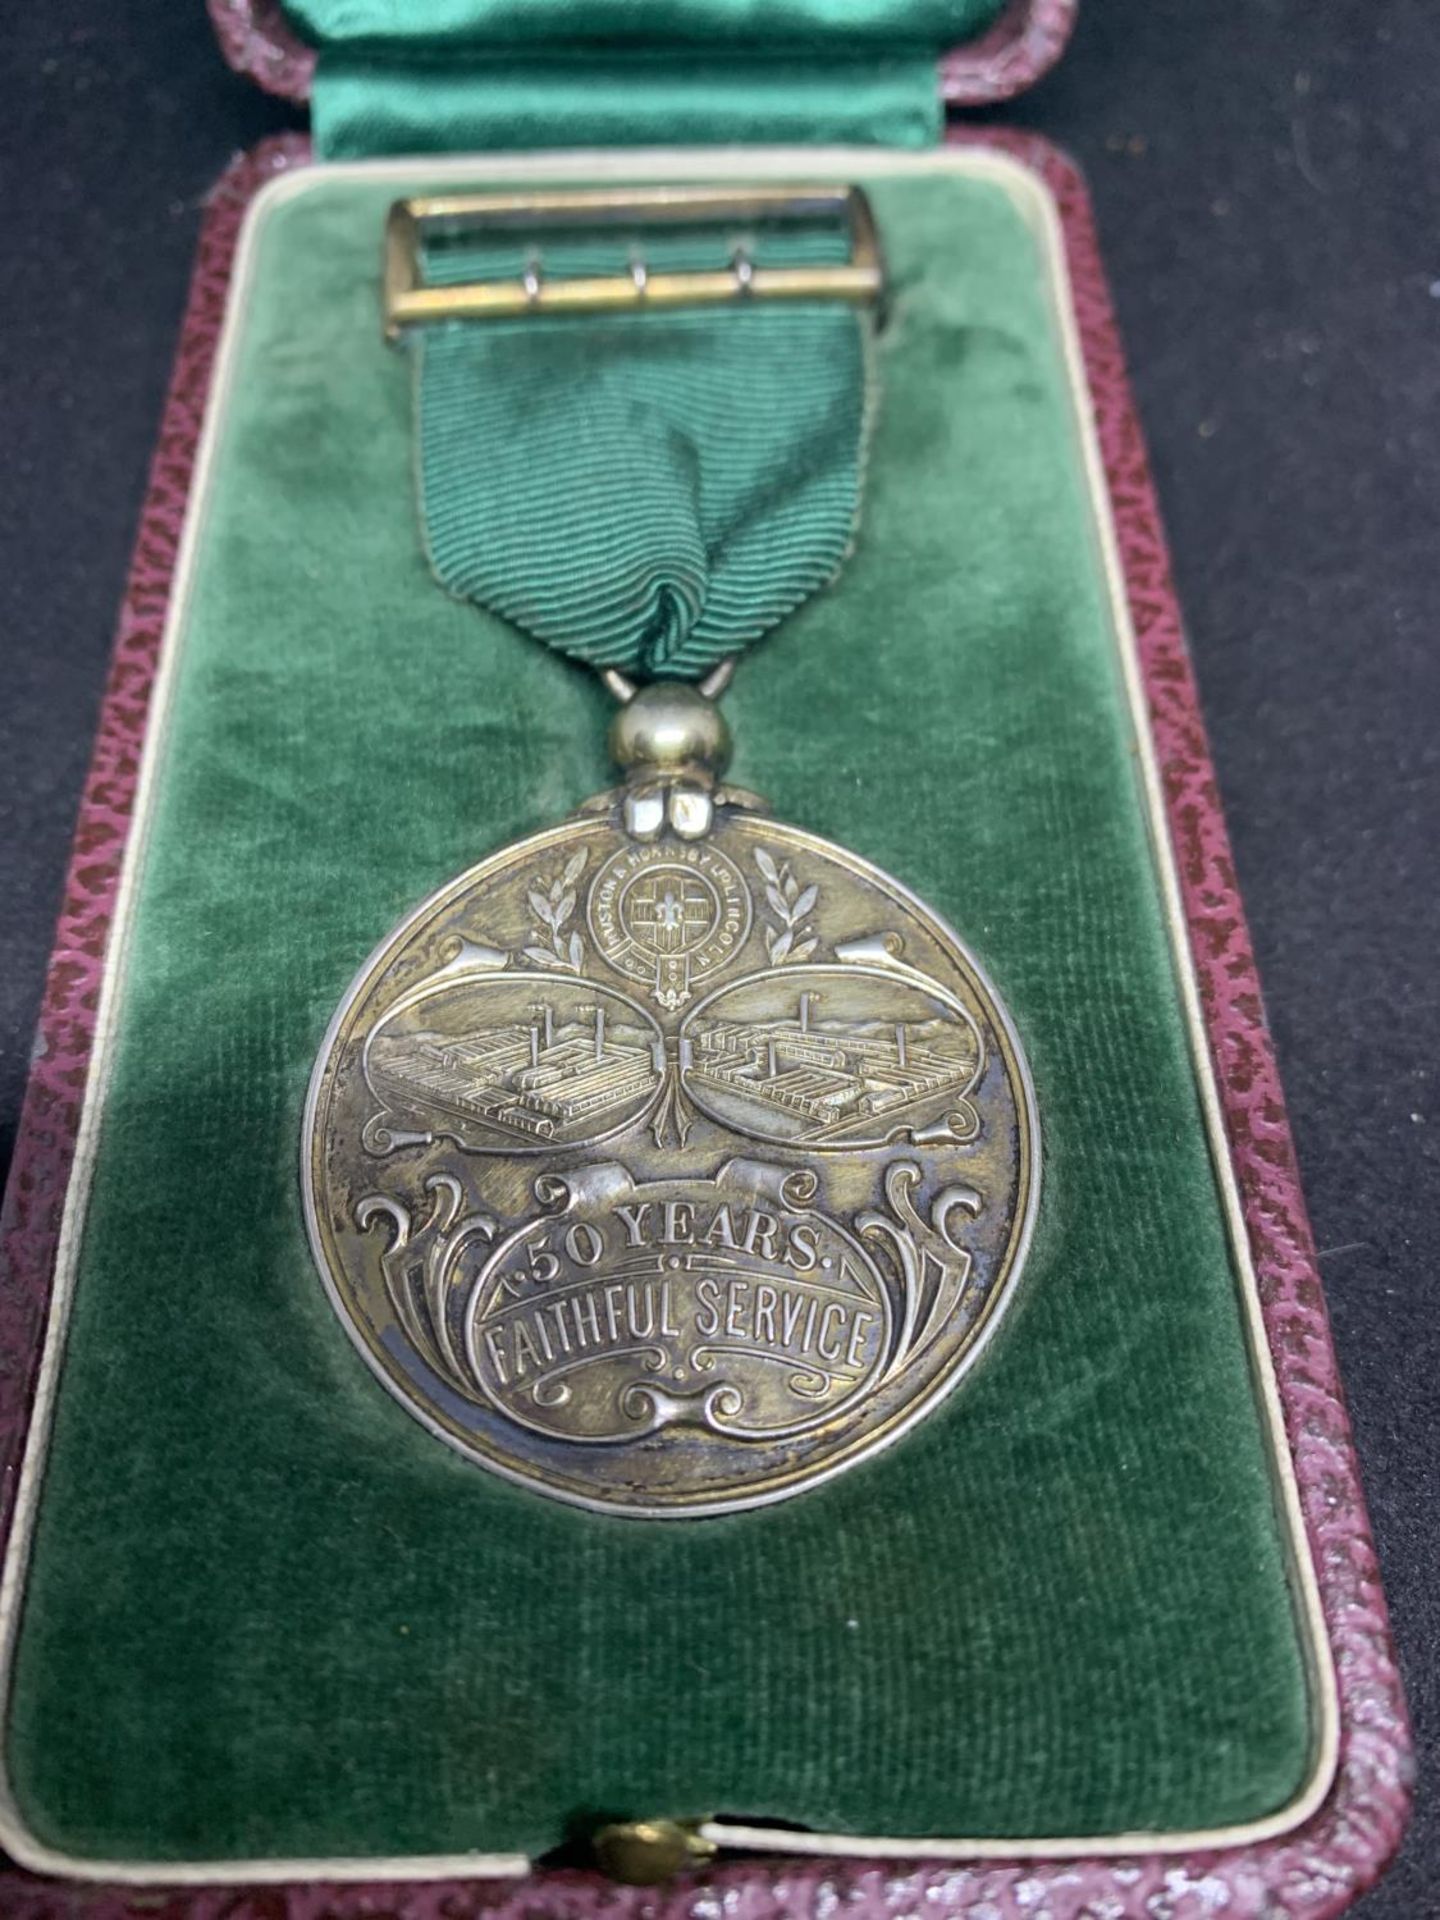 A HALLMARKED SILVER 50 YEARS FAITHFUL SERVICE MEDAL IN A PRESENTATION BOX - Image 2 of 3